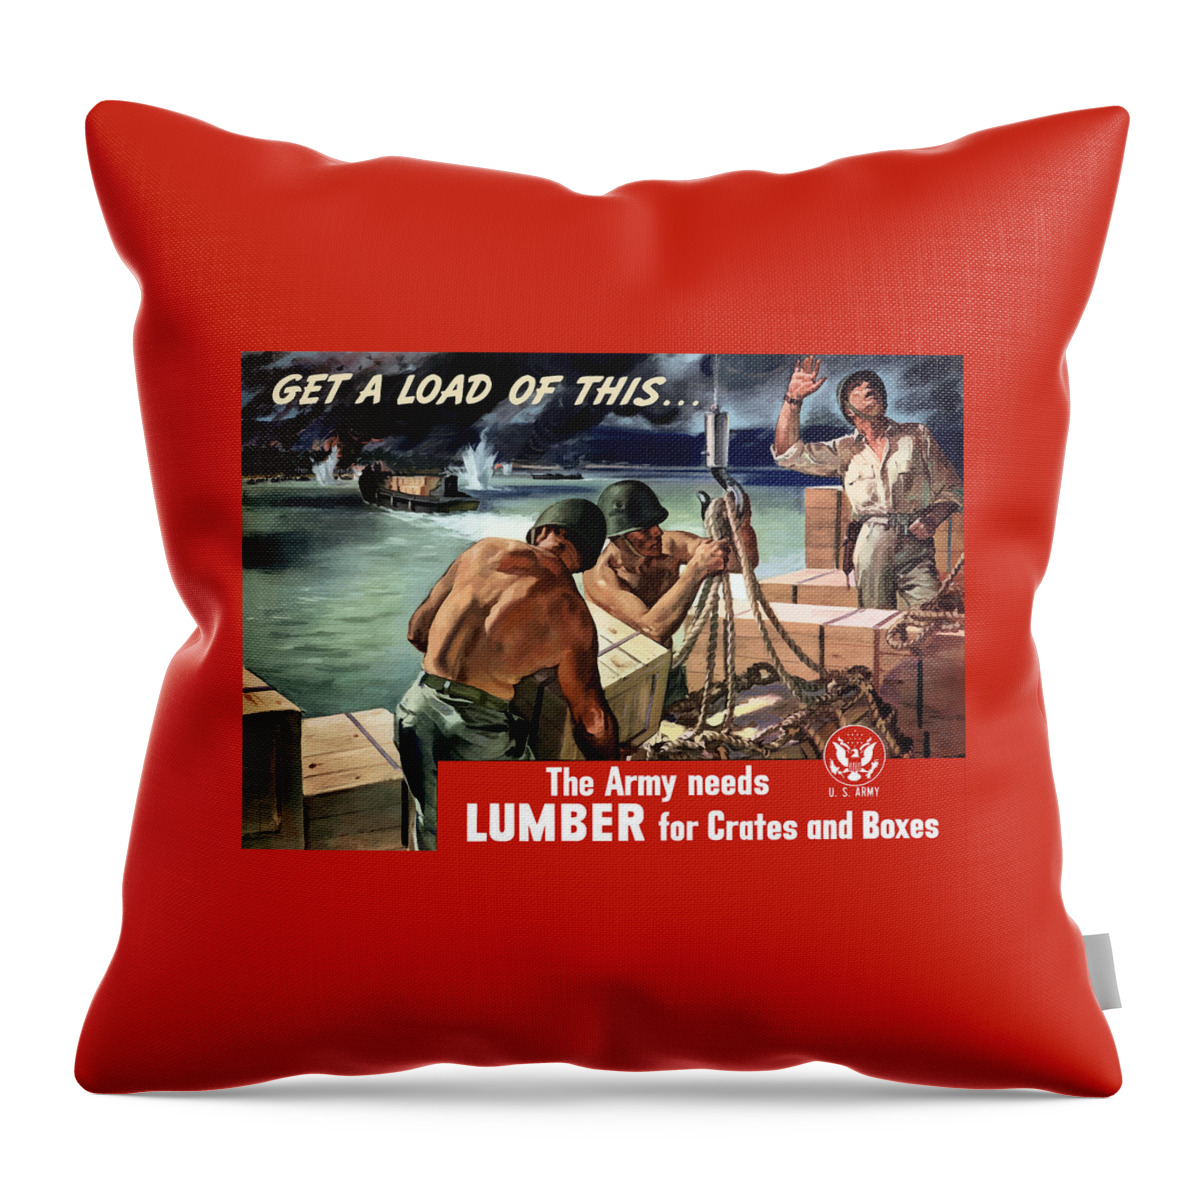 World War Ii Throw Pillow featuring the painting The Army Needs Lumber For Crates And Boxes by War Is Hell Store